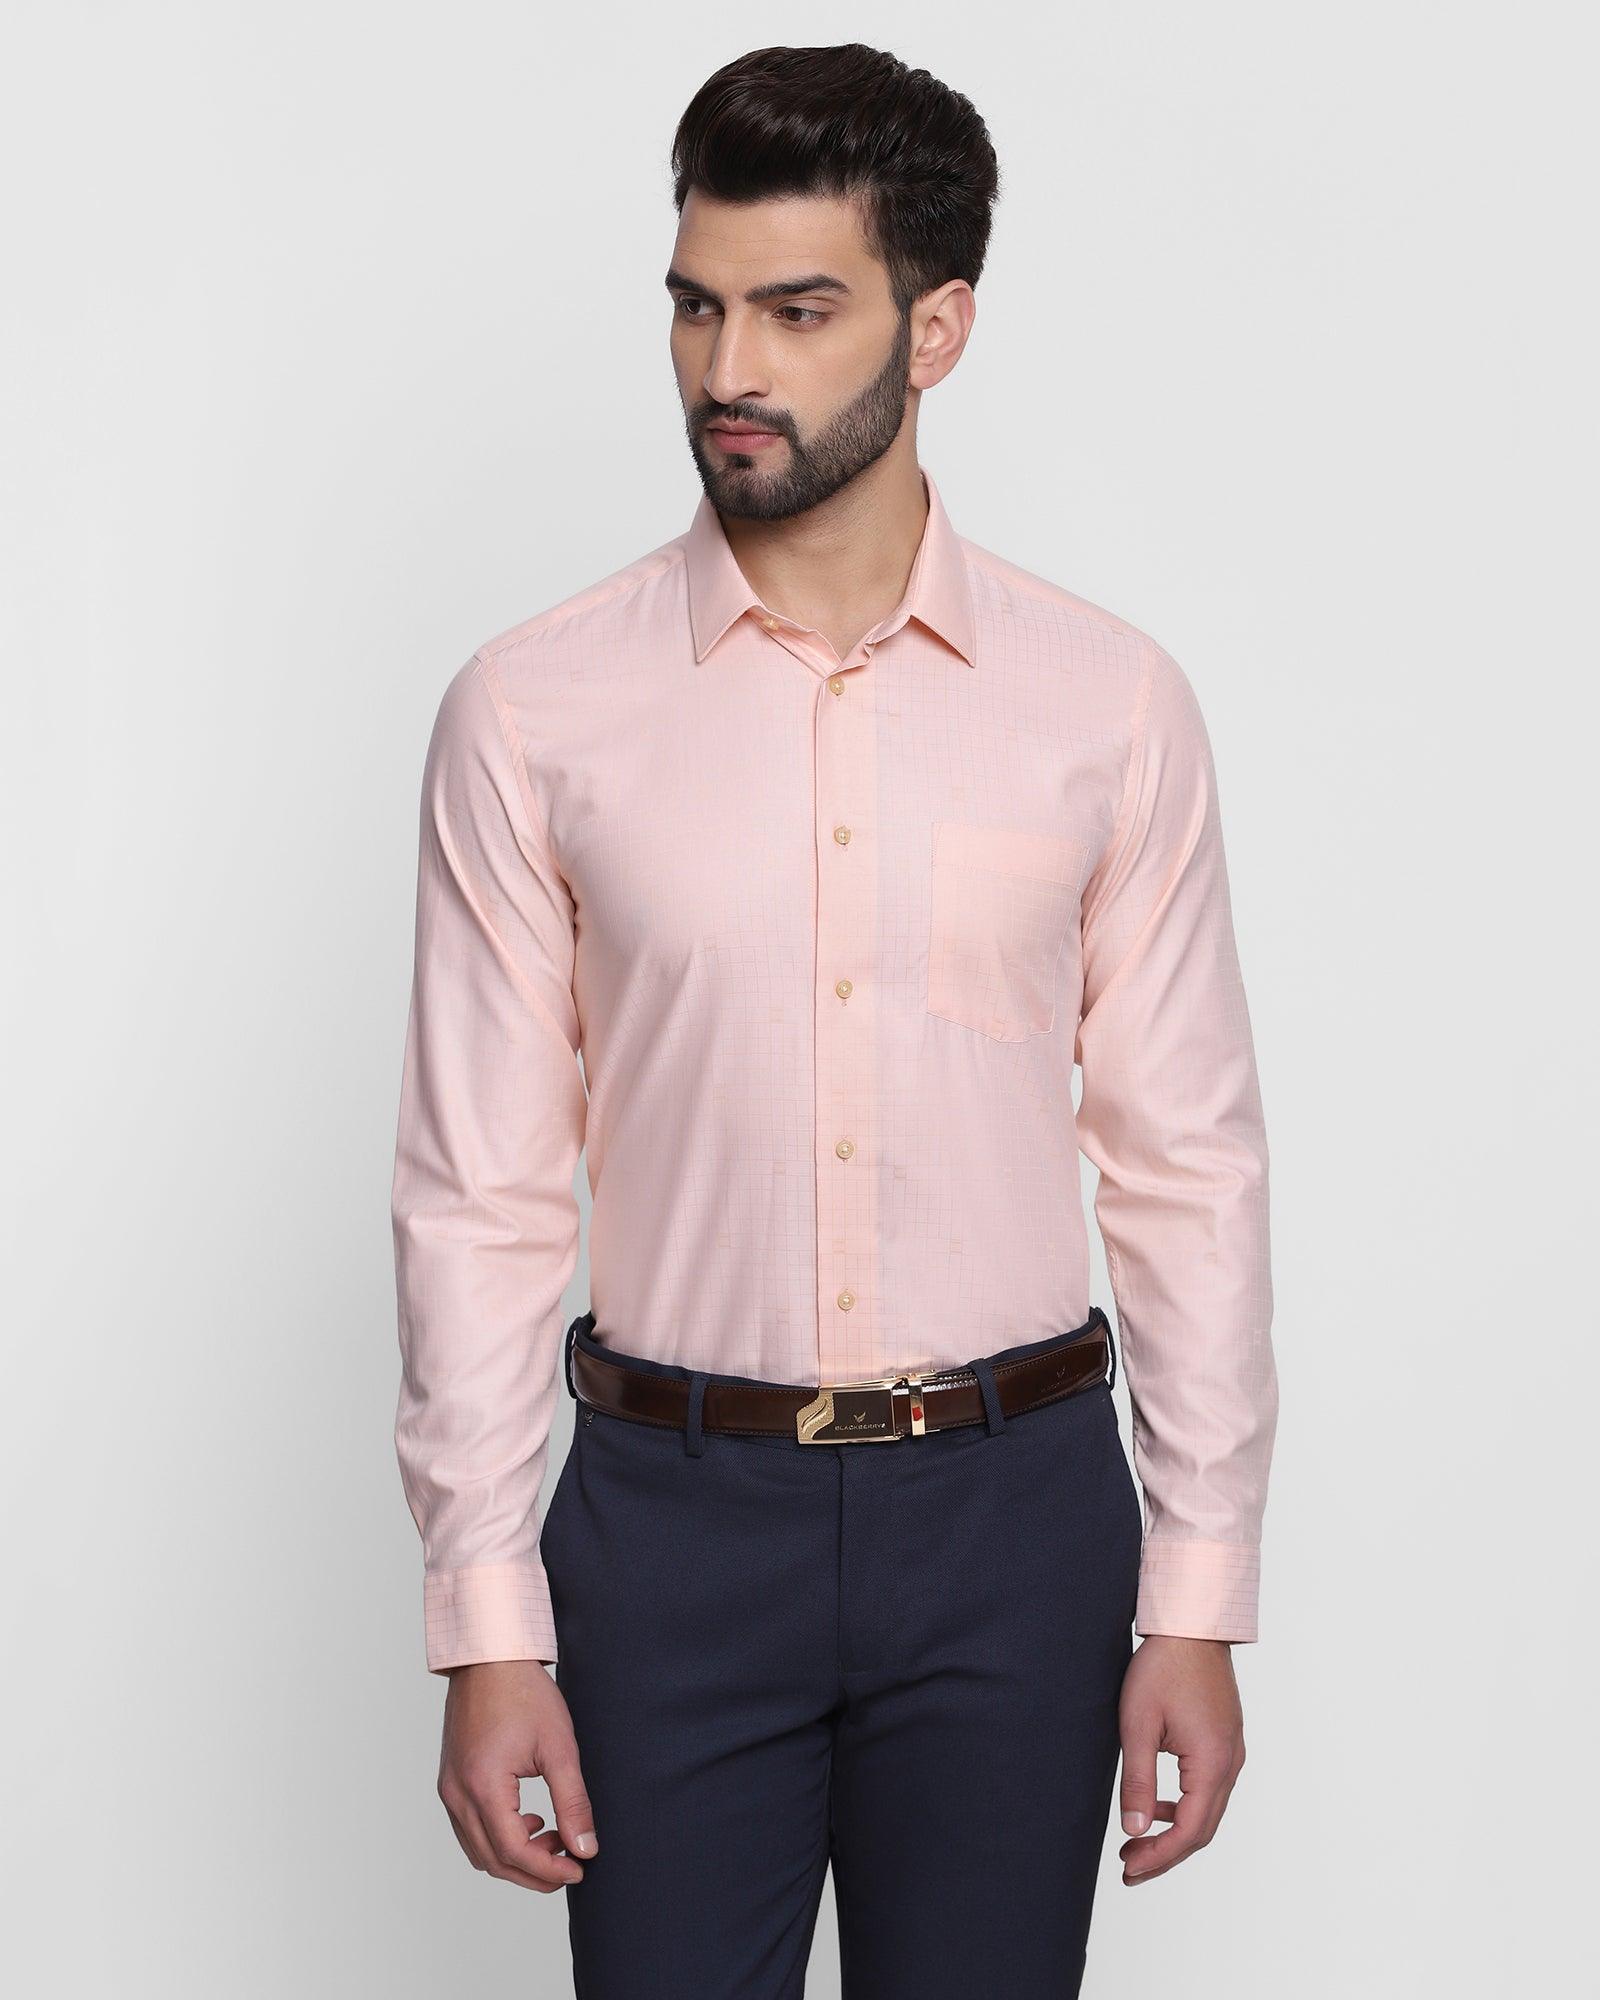 Cardinal Evaluable Indifference Formal Orange Solid Shirt - Nale